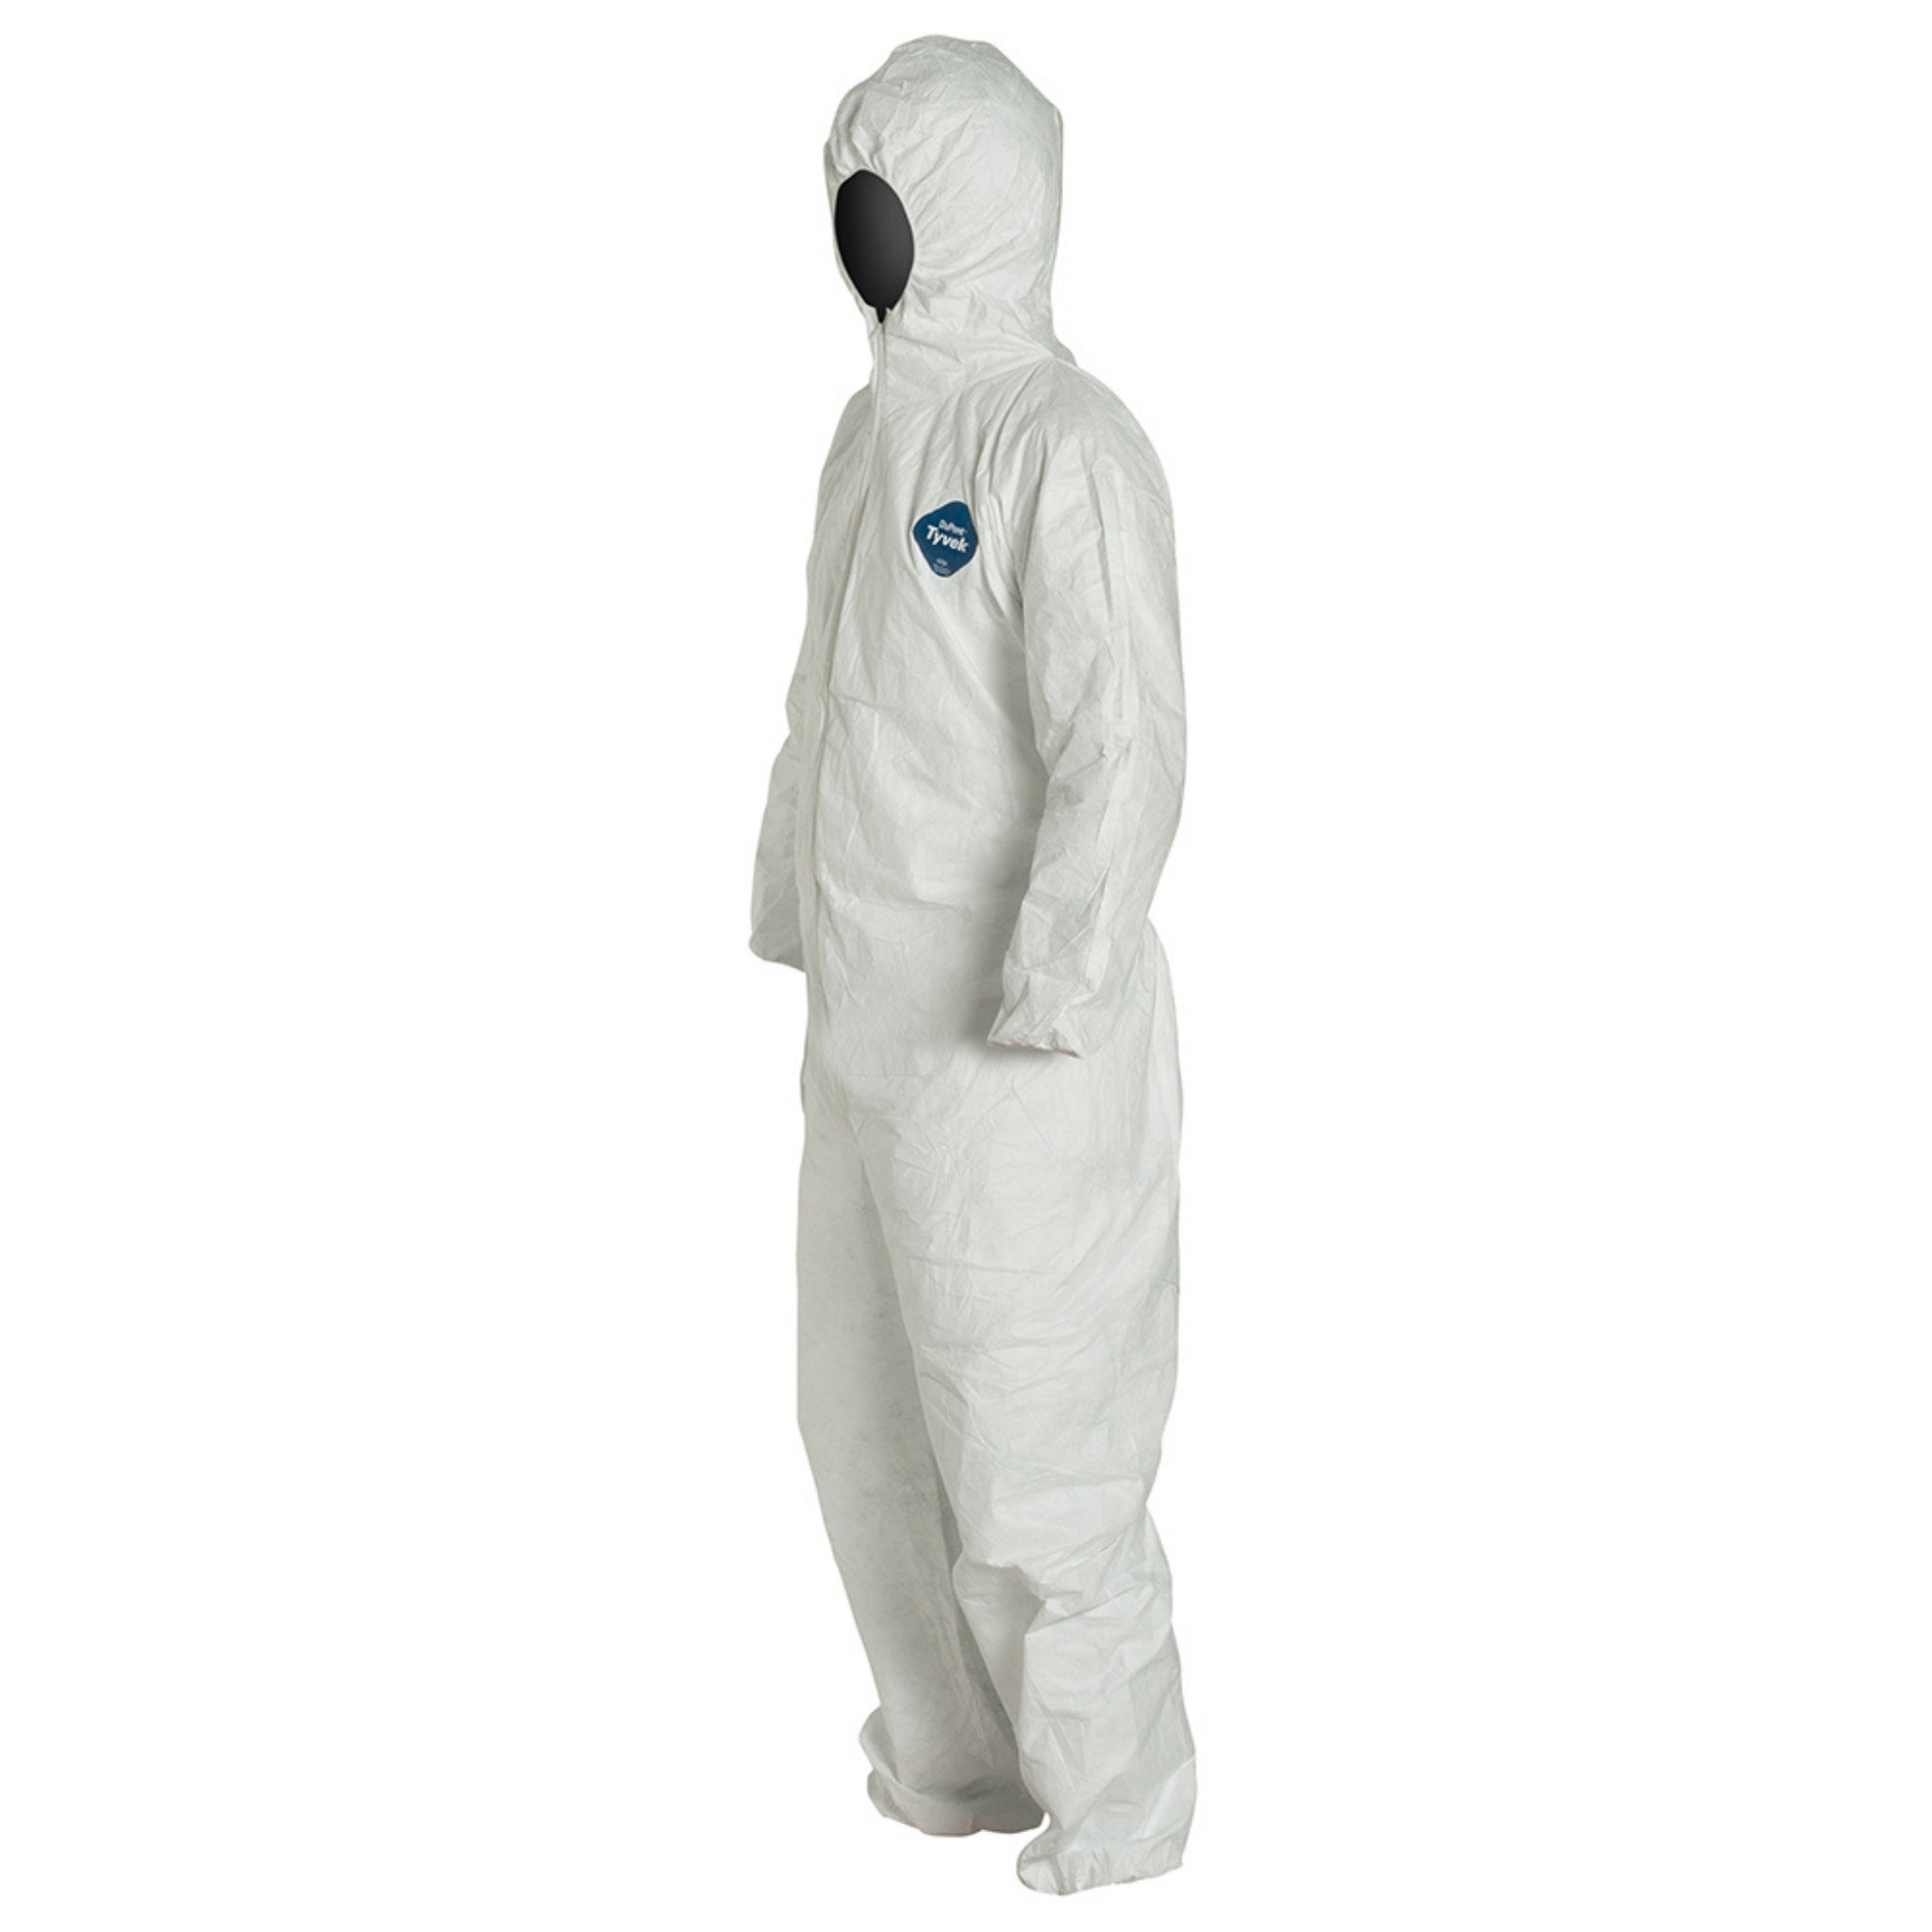 DuPont TY127S- 1 Suit: Tyvek 400  Disposable Protective Coverall, White